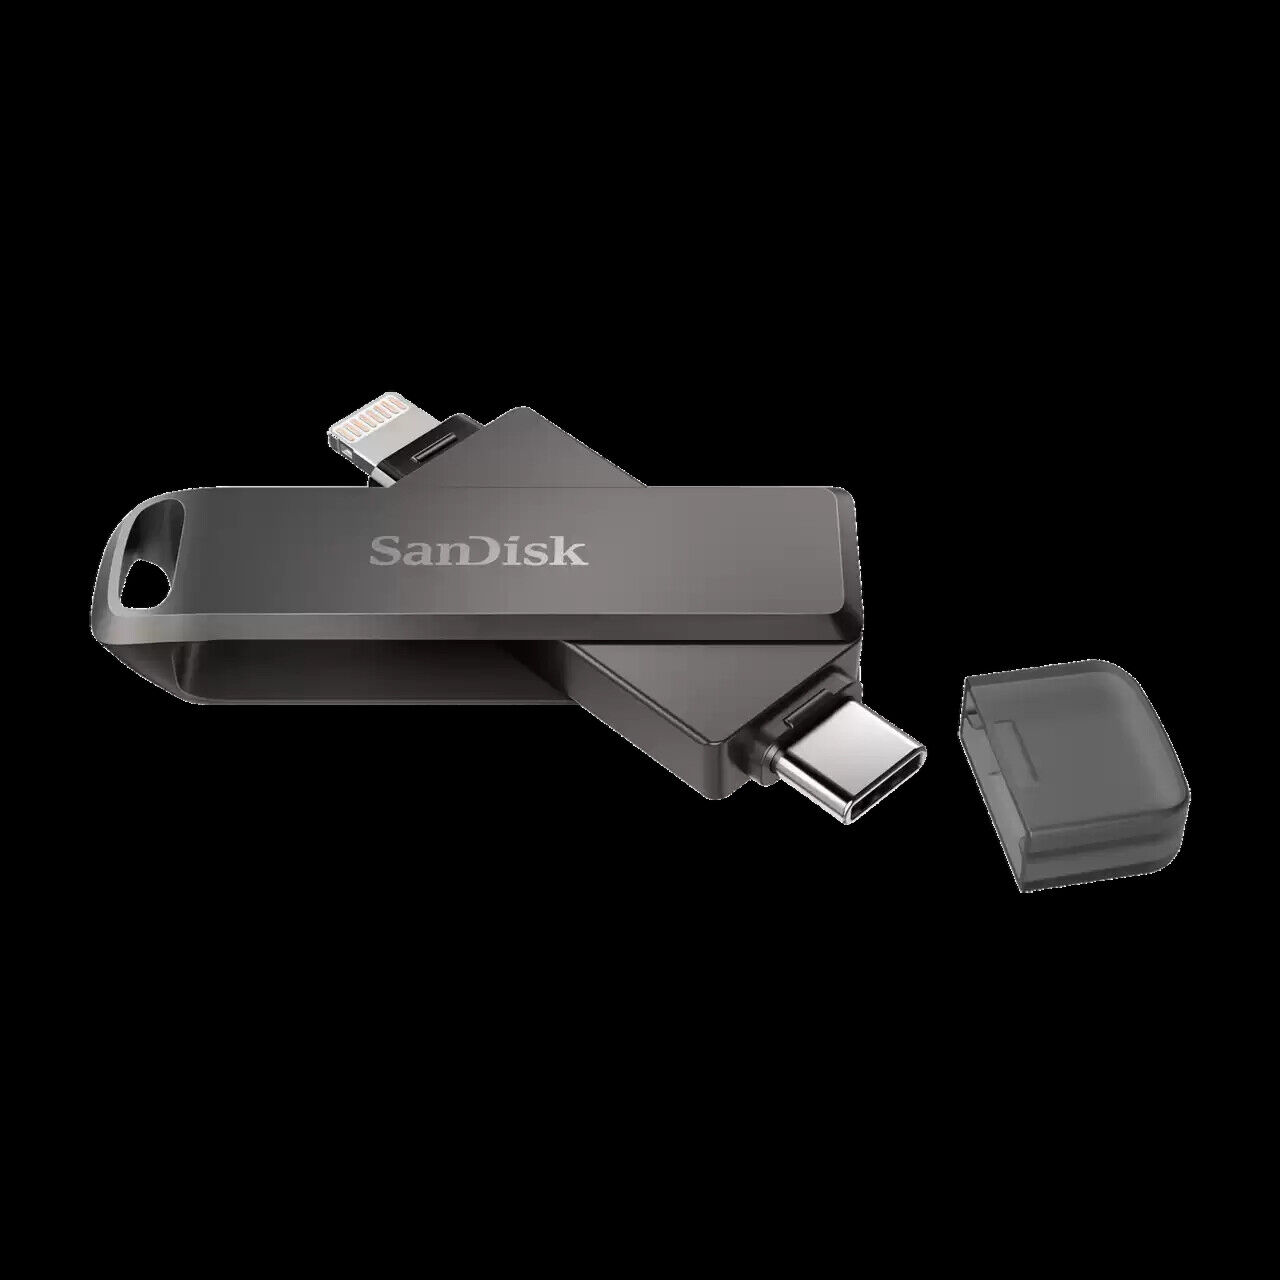 SanDisk 256GB iXpand Flash Drive Luxe, for iPhone and iPad - SDIX70N-256G-GG6NE